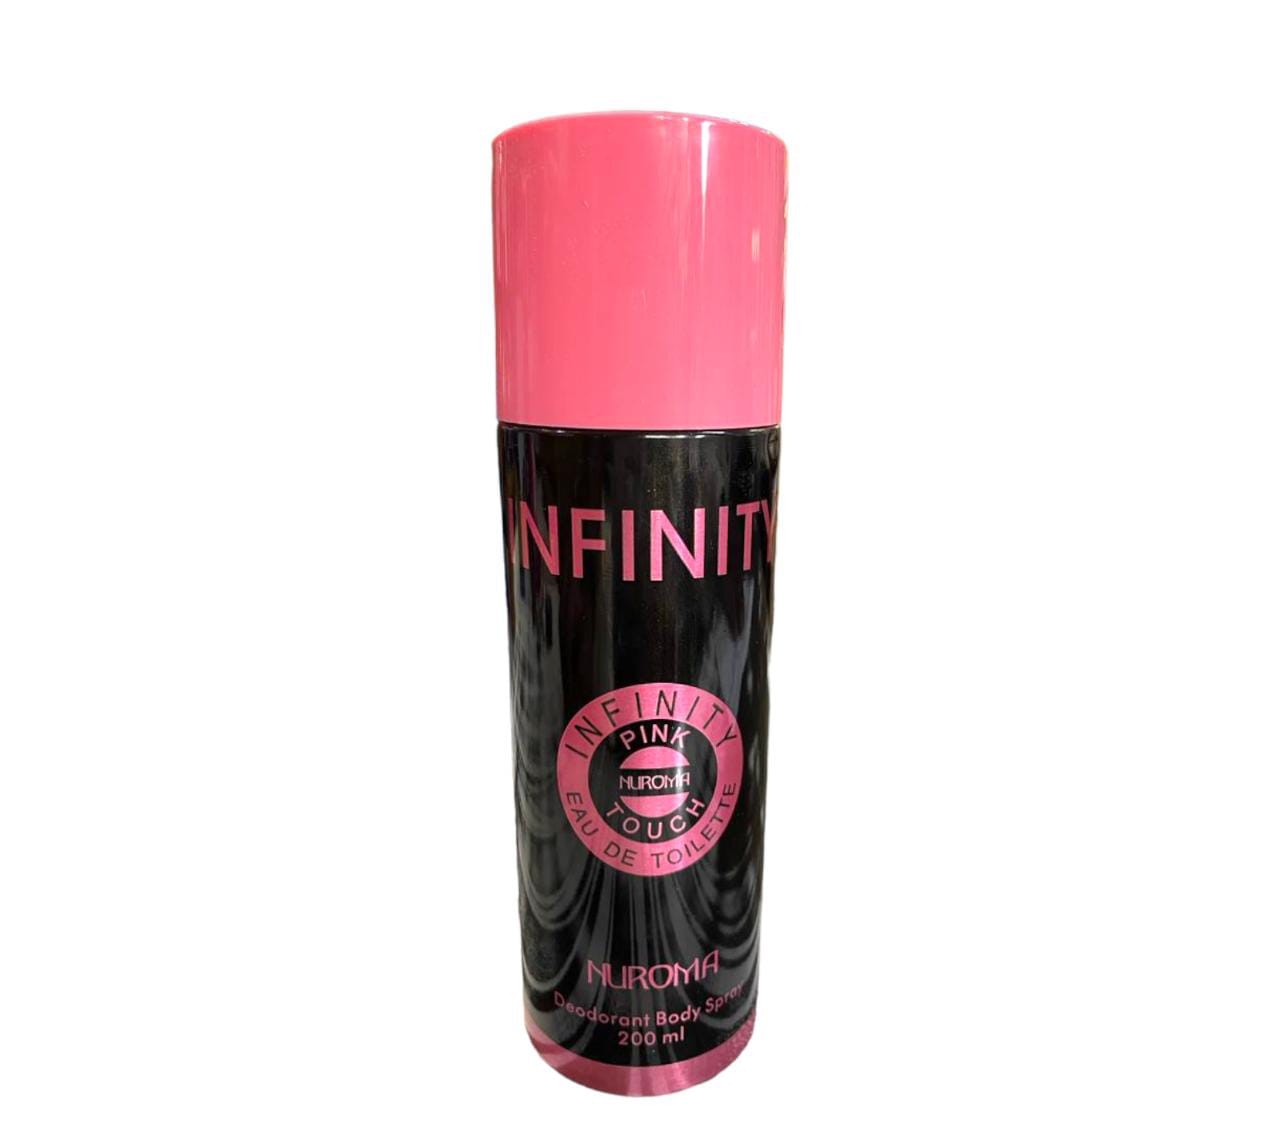 Infinity pink touch perfume 